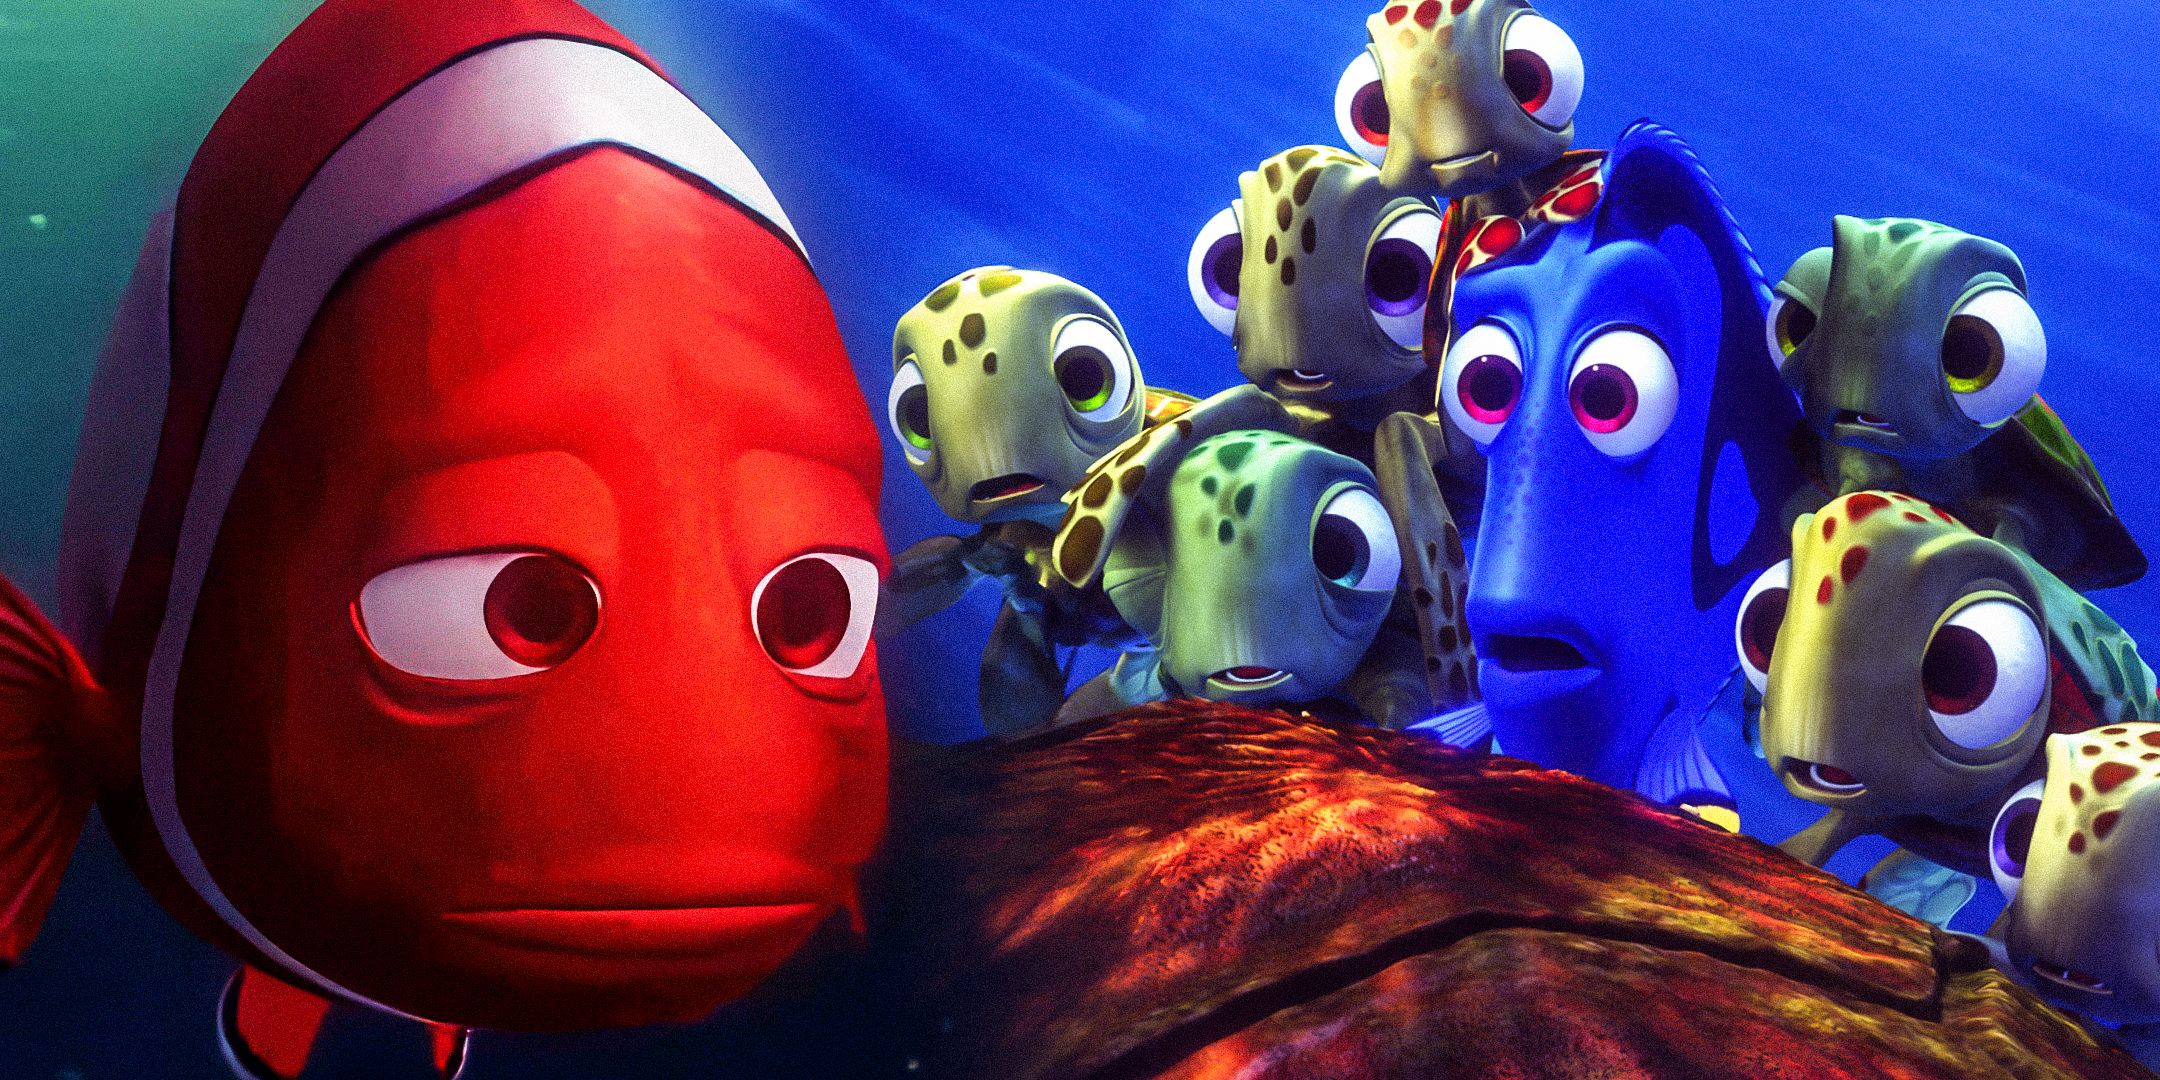 Finding Nemo sad Marlin next to Dory and the young turtles